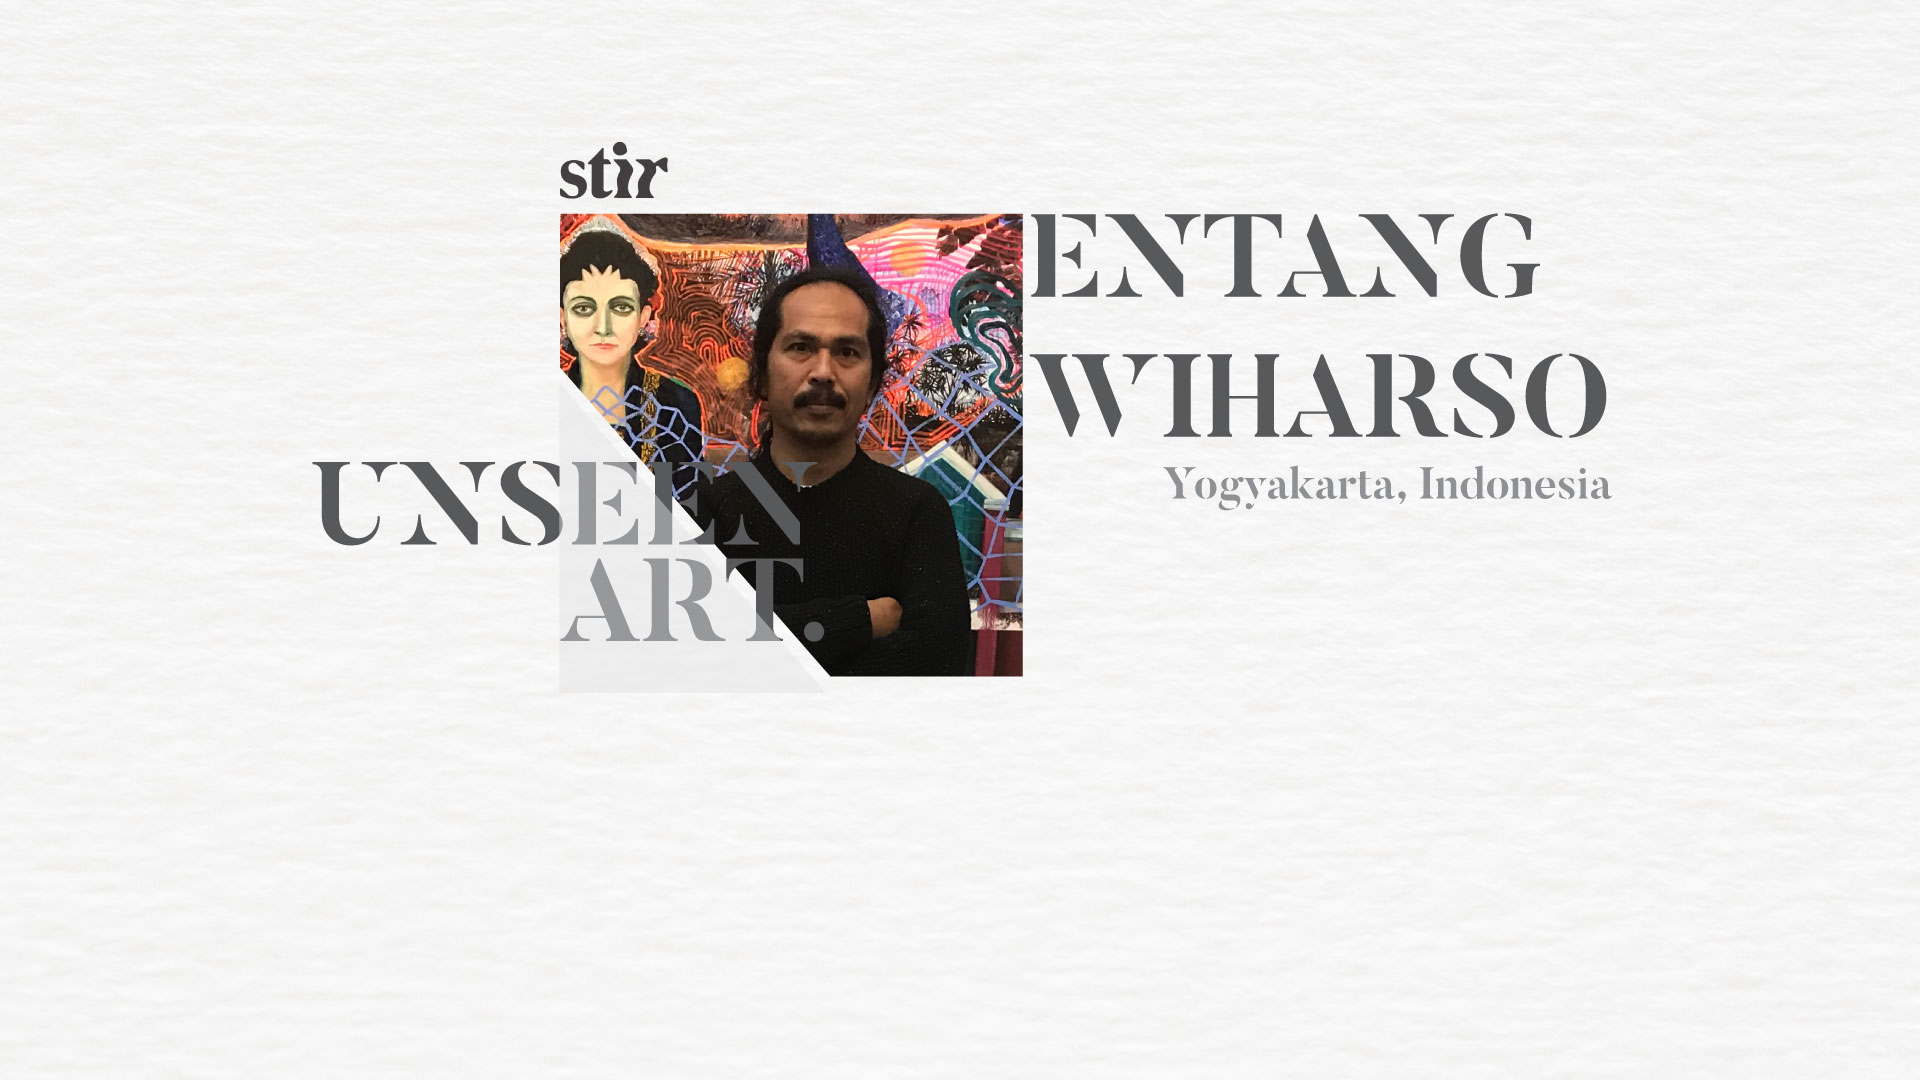 Unseen Art: Entang Wiharso plays with a new material in an unrevealed work - glitter